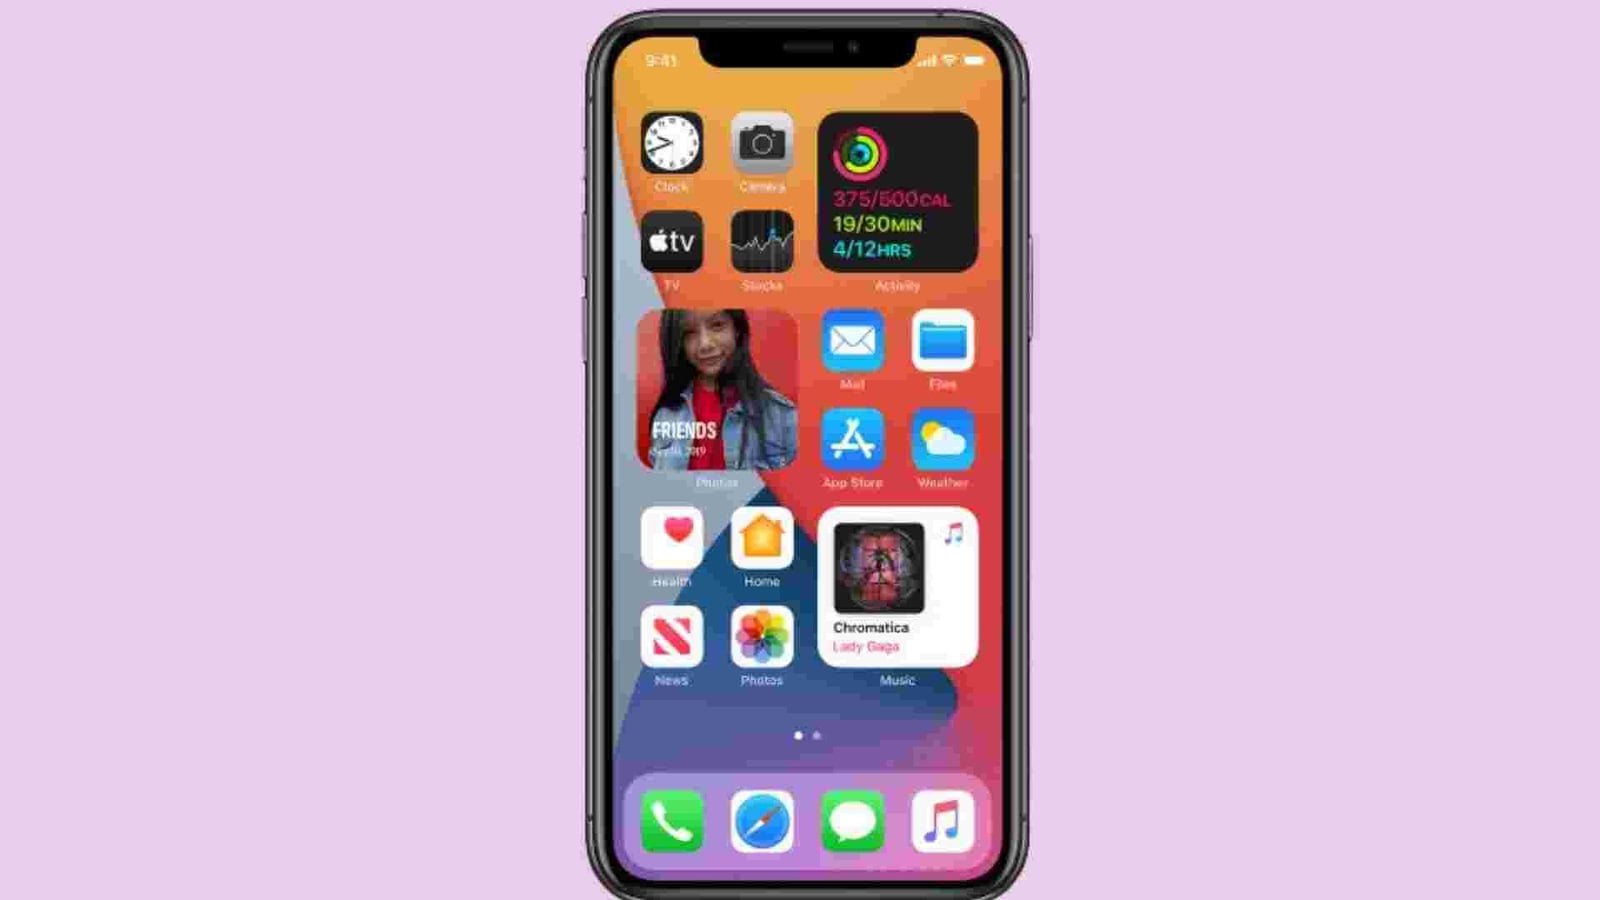 Apple iOS 14 beta 2 rolls out: Apple Music gets animated artwork, new privacy features and more | Tech News